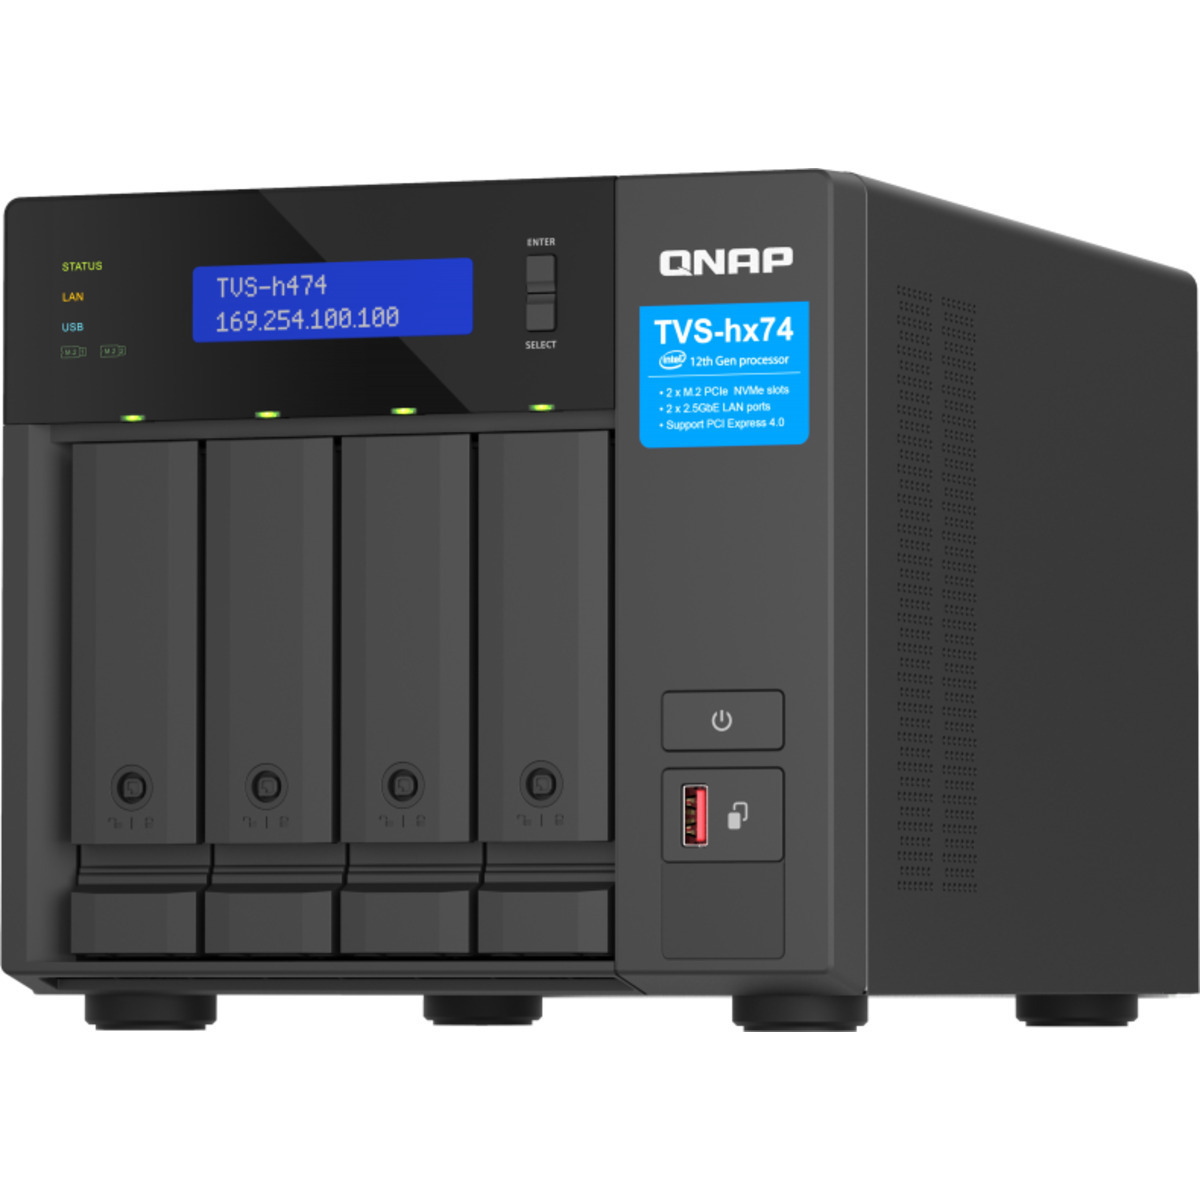 buy QNAP TVS-h474 Pentium Gold 24tb Desktop NAS - Network Attached Storage Device 4x6000gb Western Digital Red WD60EFAX 3.5 5400rpm SATA 6Gb/s HDD NAS Class Drives Installed - Burn-In Tested - ON SALE - FREE RAM UPGRADE - nas headquarters buy network attached storage server device das new raid-5 free shipping simply usa TVS-h474 Pentium Gold